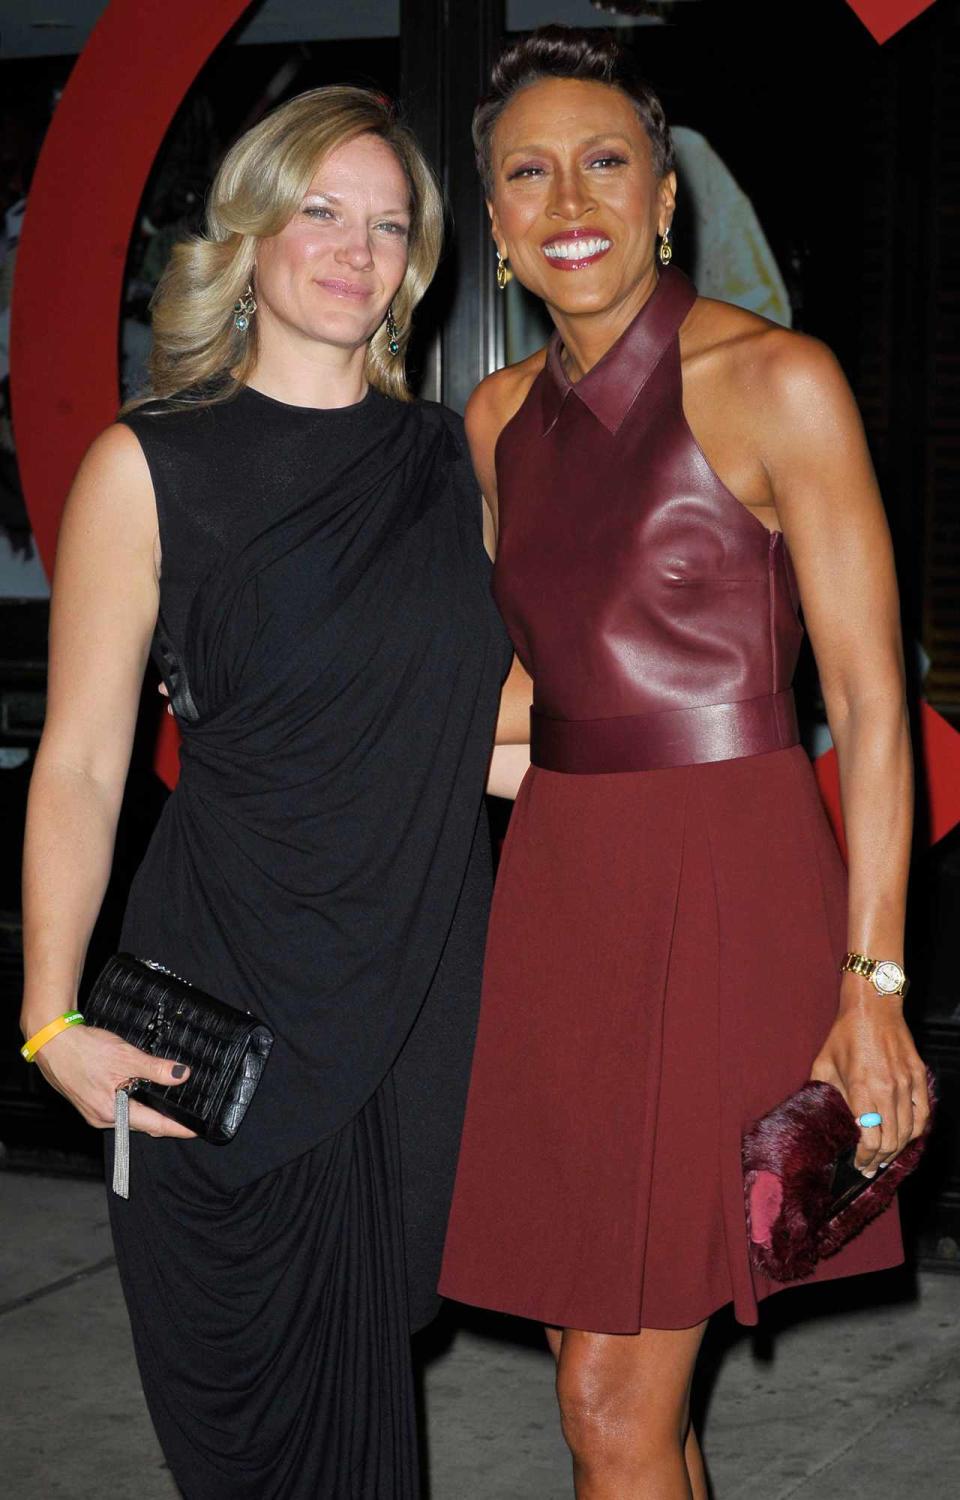 Amber Laign and Robin Roberts are seen on November 10, 2014 in New York City